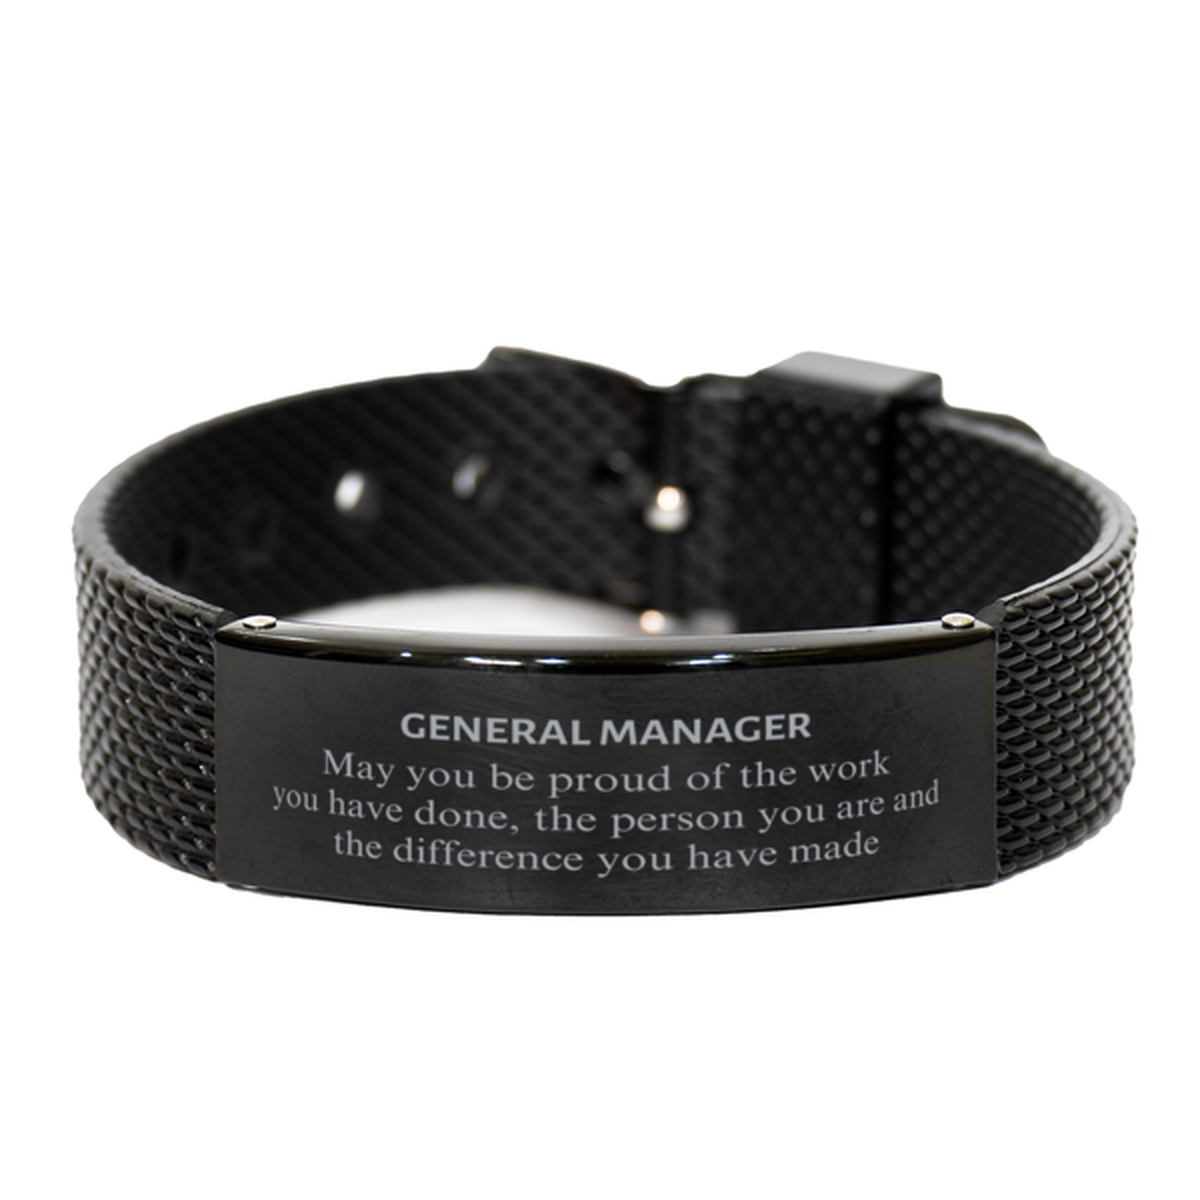 General Manager May you be proud of the work you have done, Retirement General Manager Black Shark Mesh Bracelet for Colleague Appreciation Gifts Amazing for General Manager